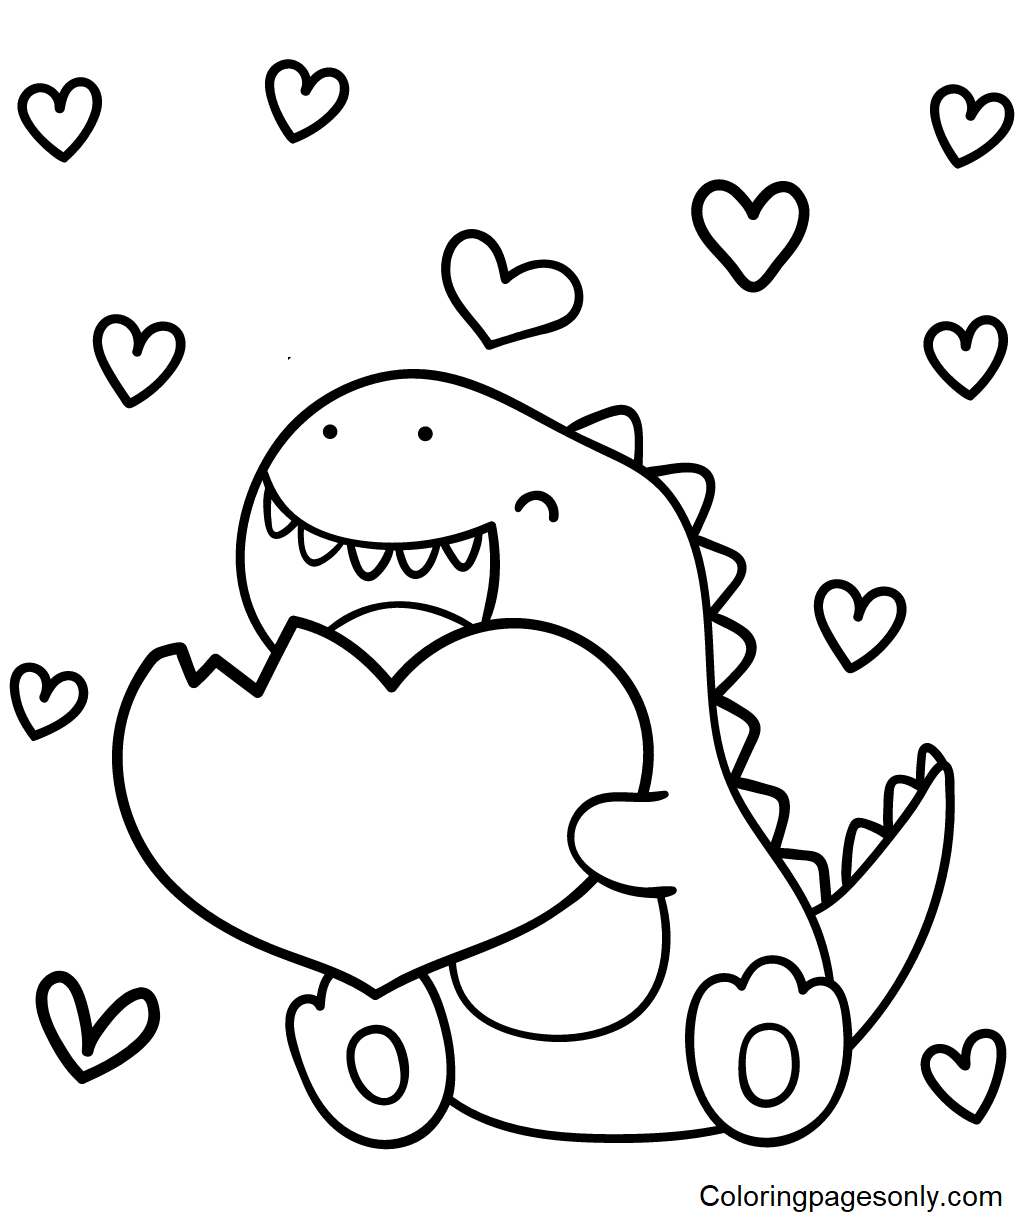 Dinosaur with Heart Coloring Pages